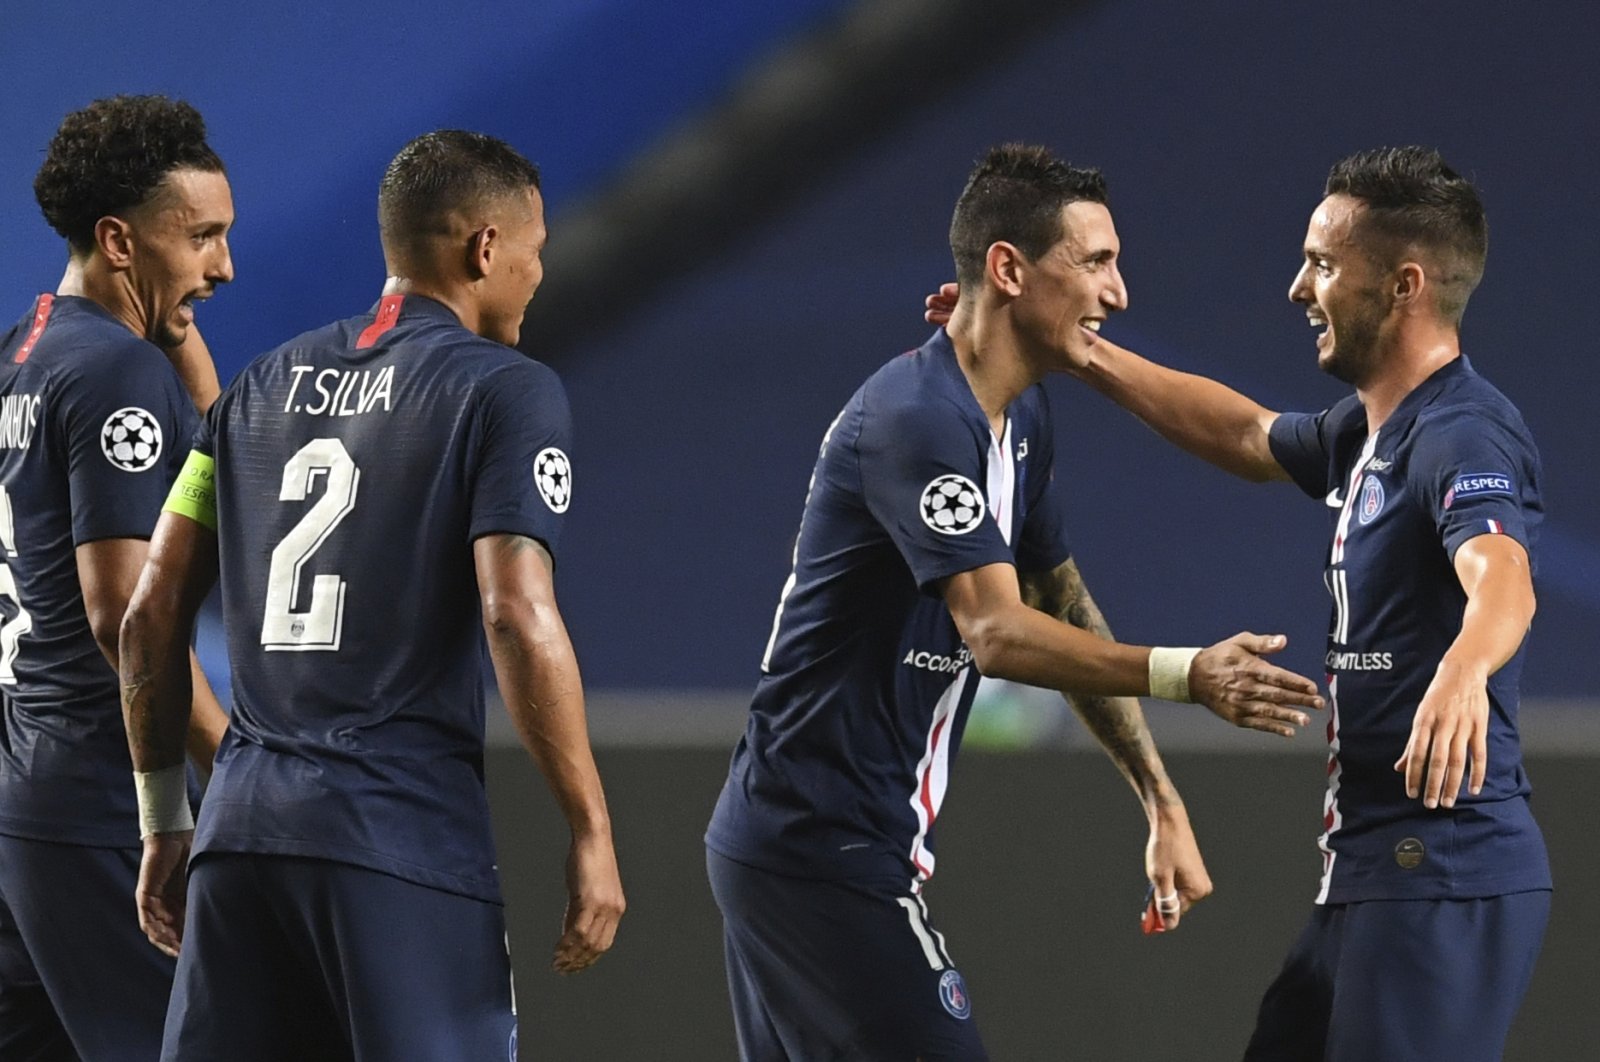 PSG players celebrate victory after a Champions League semifinal match against RB Leipzig in Lisbon, Portugal, Aug. 18, 2020. (AP Photo)